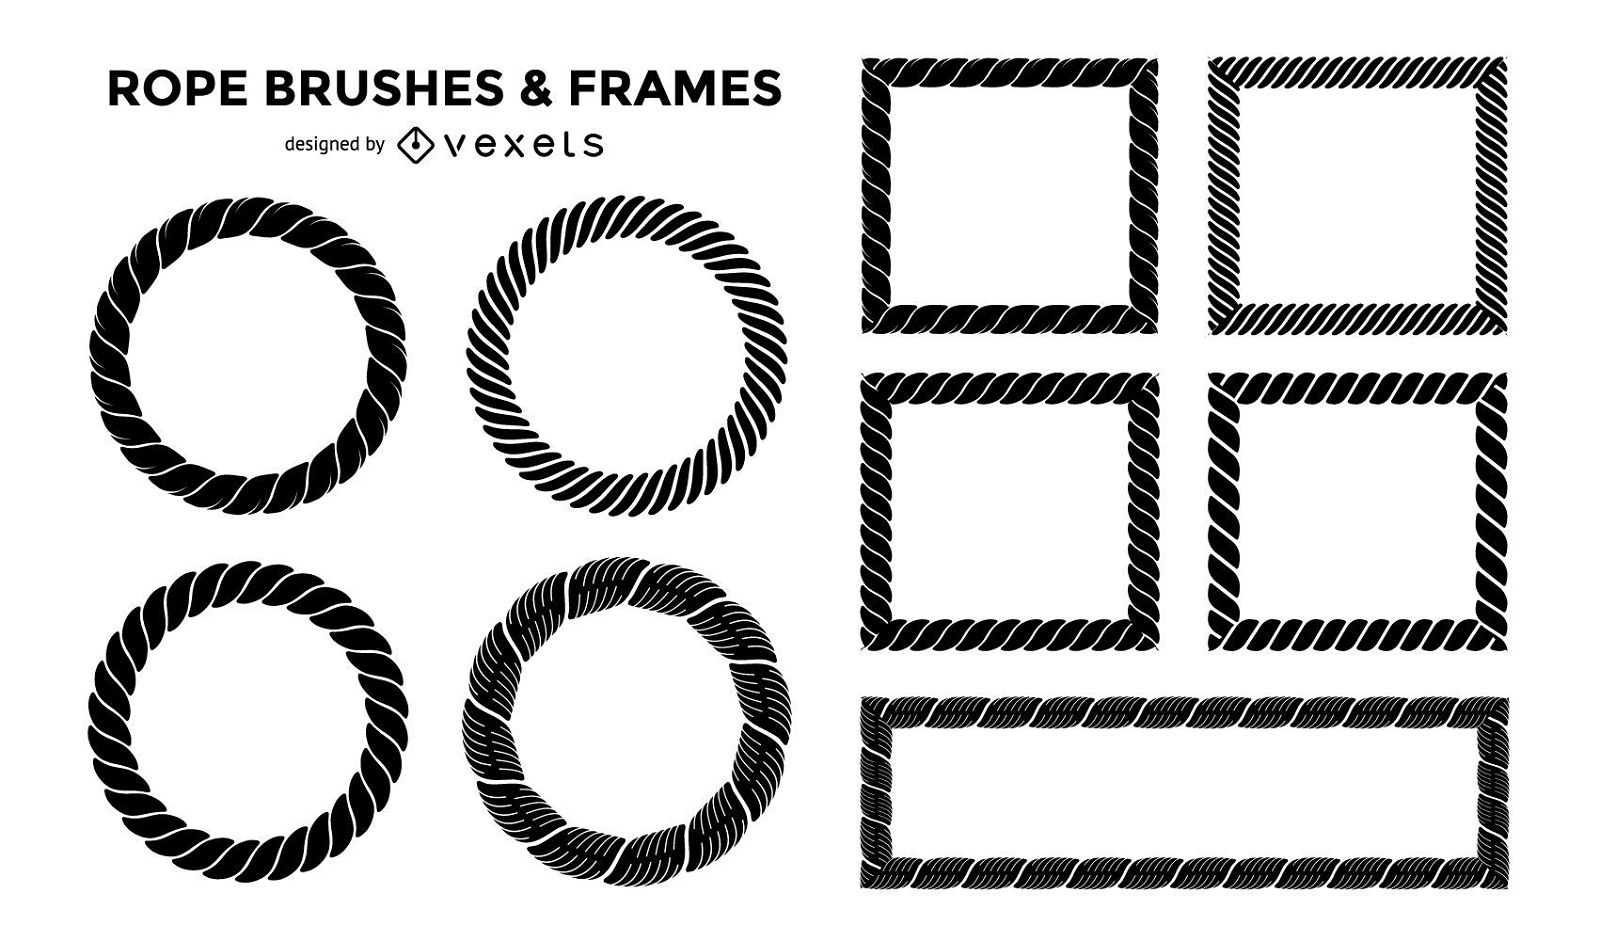 Rope brushes and frames set